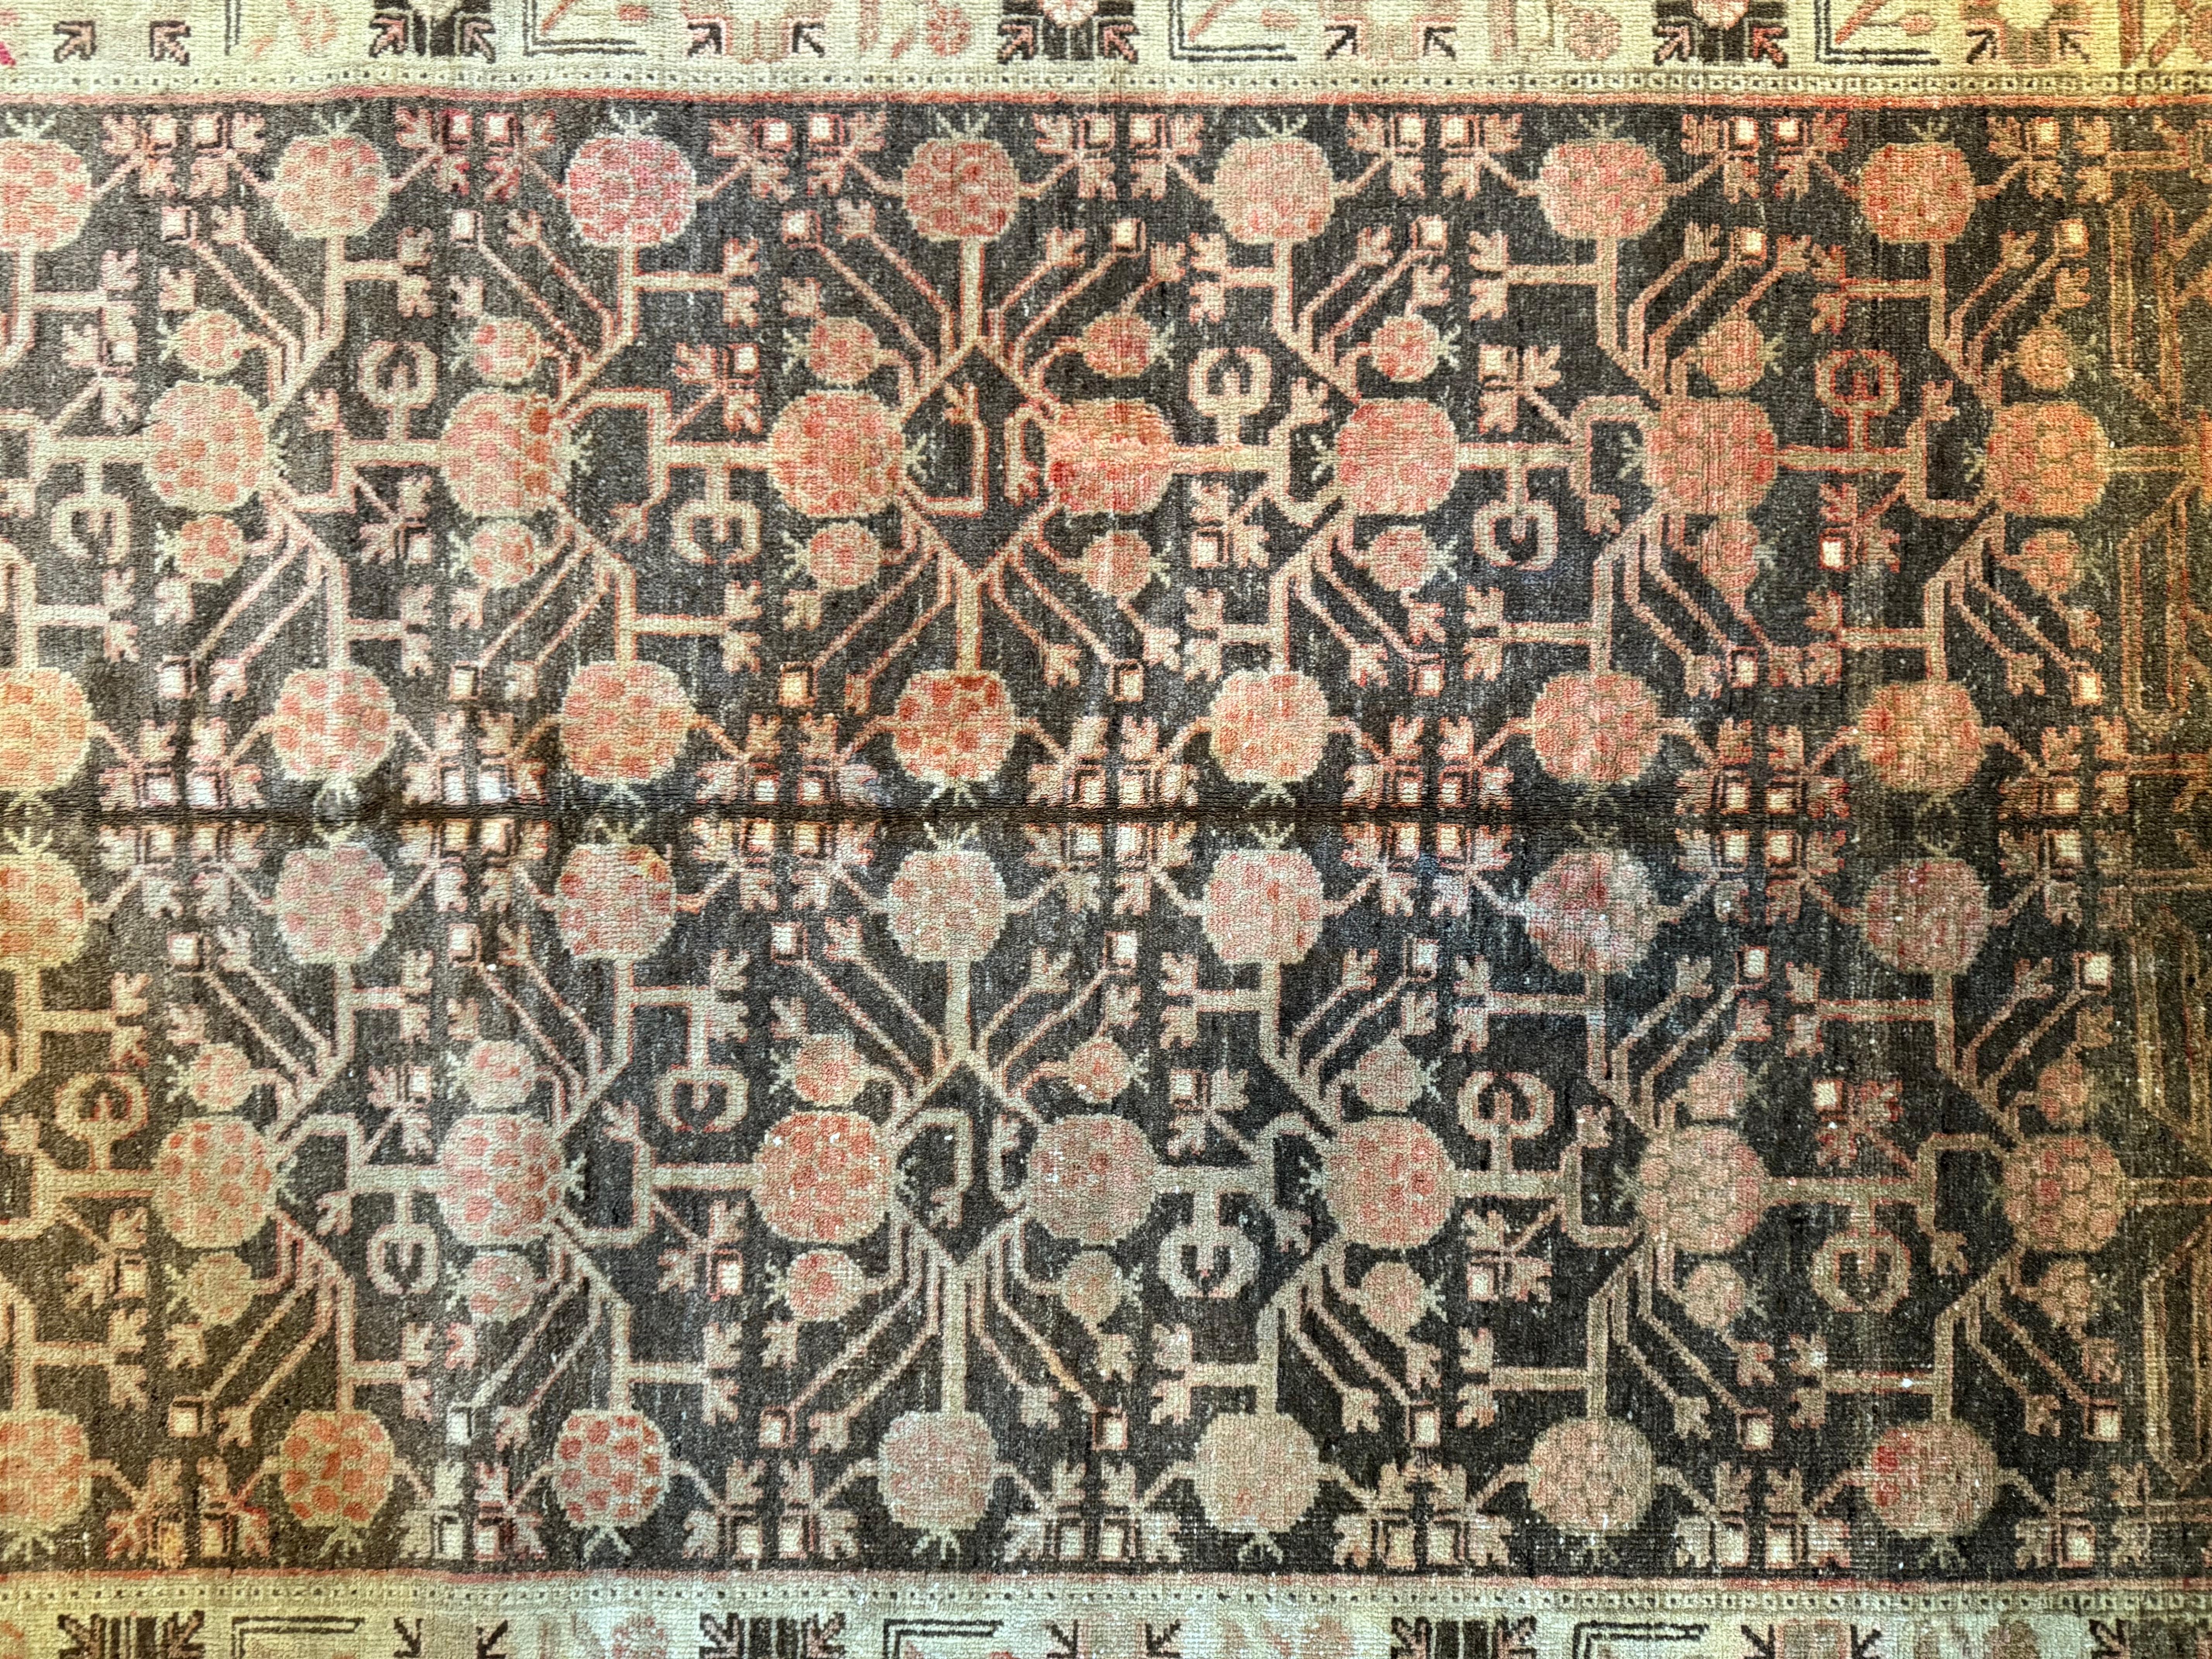 Embrace timeless elegance with this 19th-century Antique Samarkand Rug, sized at 6.6' x 4.6'. Its intricate patterns and warm tones add a touch of vintage charm to any American home, merging classic allure with modern sophistication.